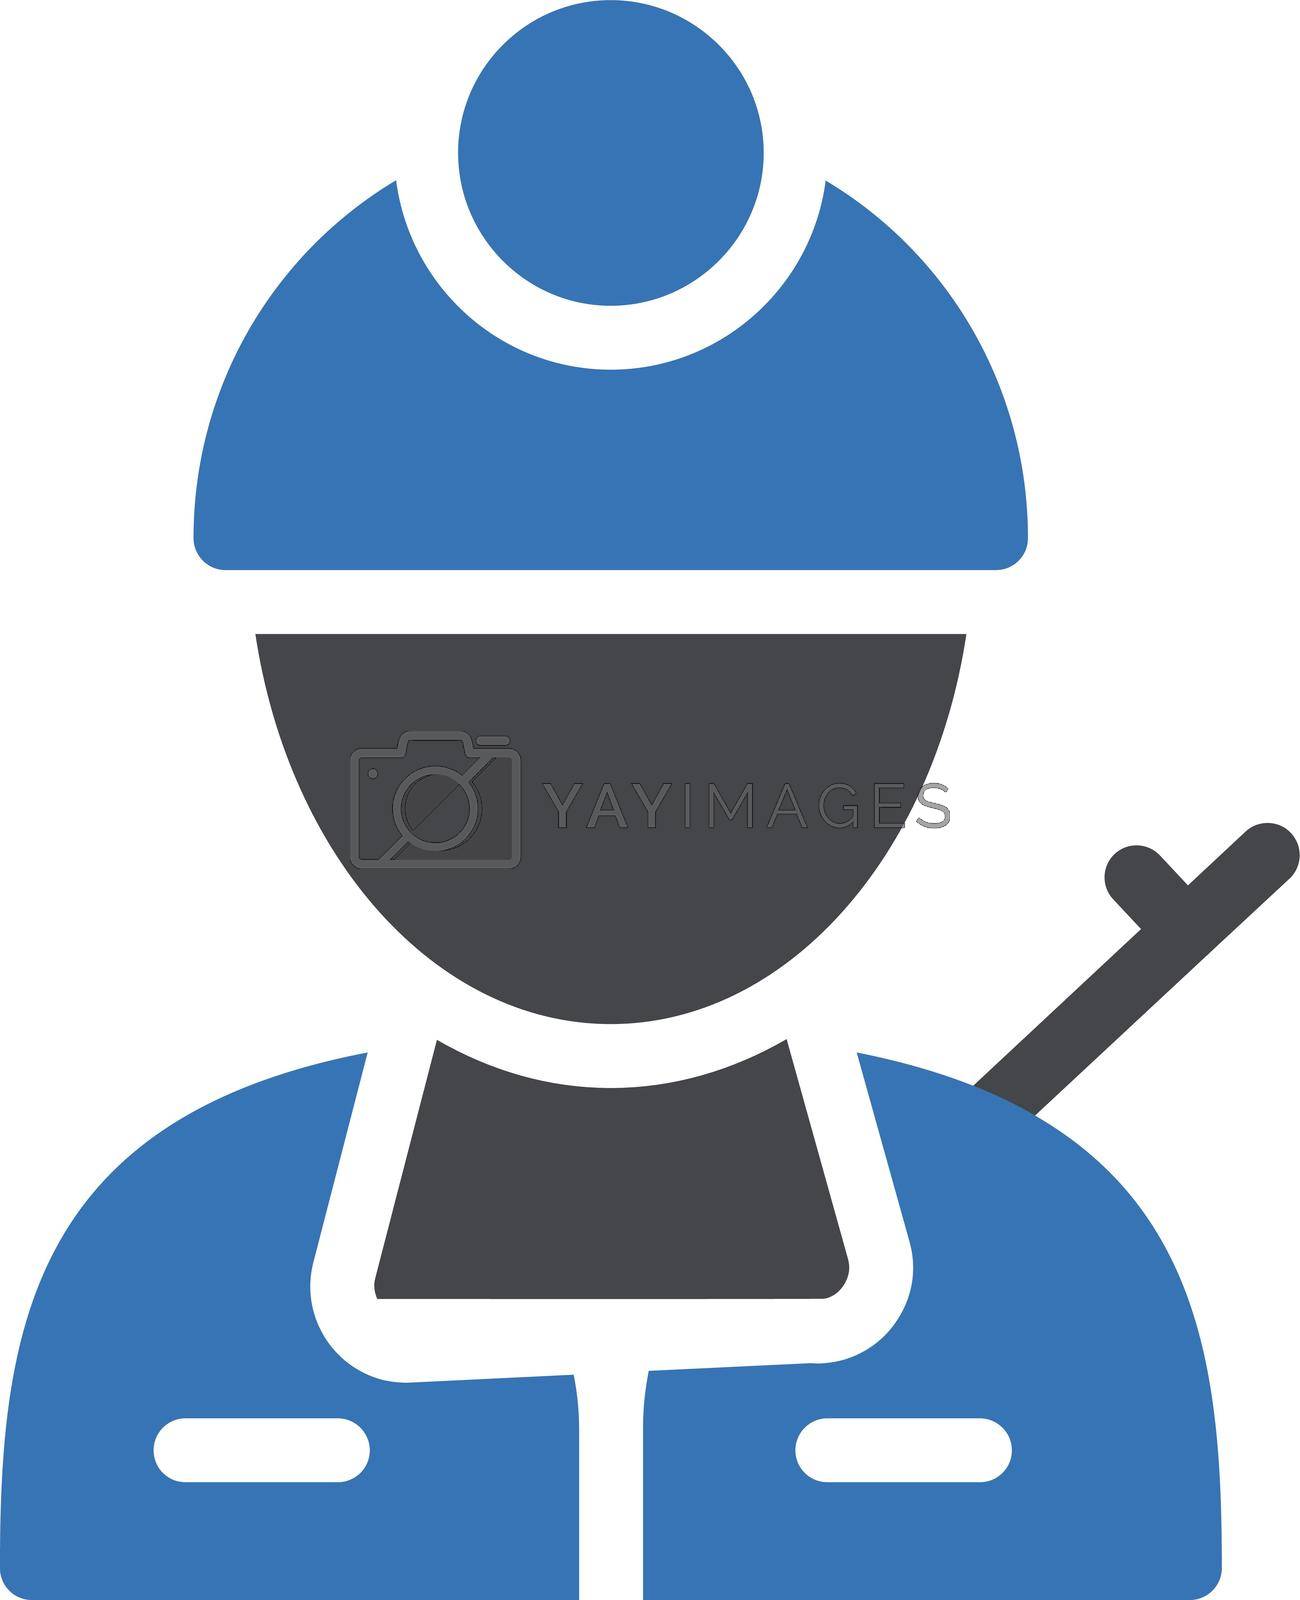 Royalty free image of worker by vectorstall